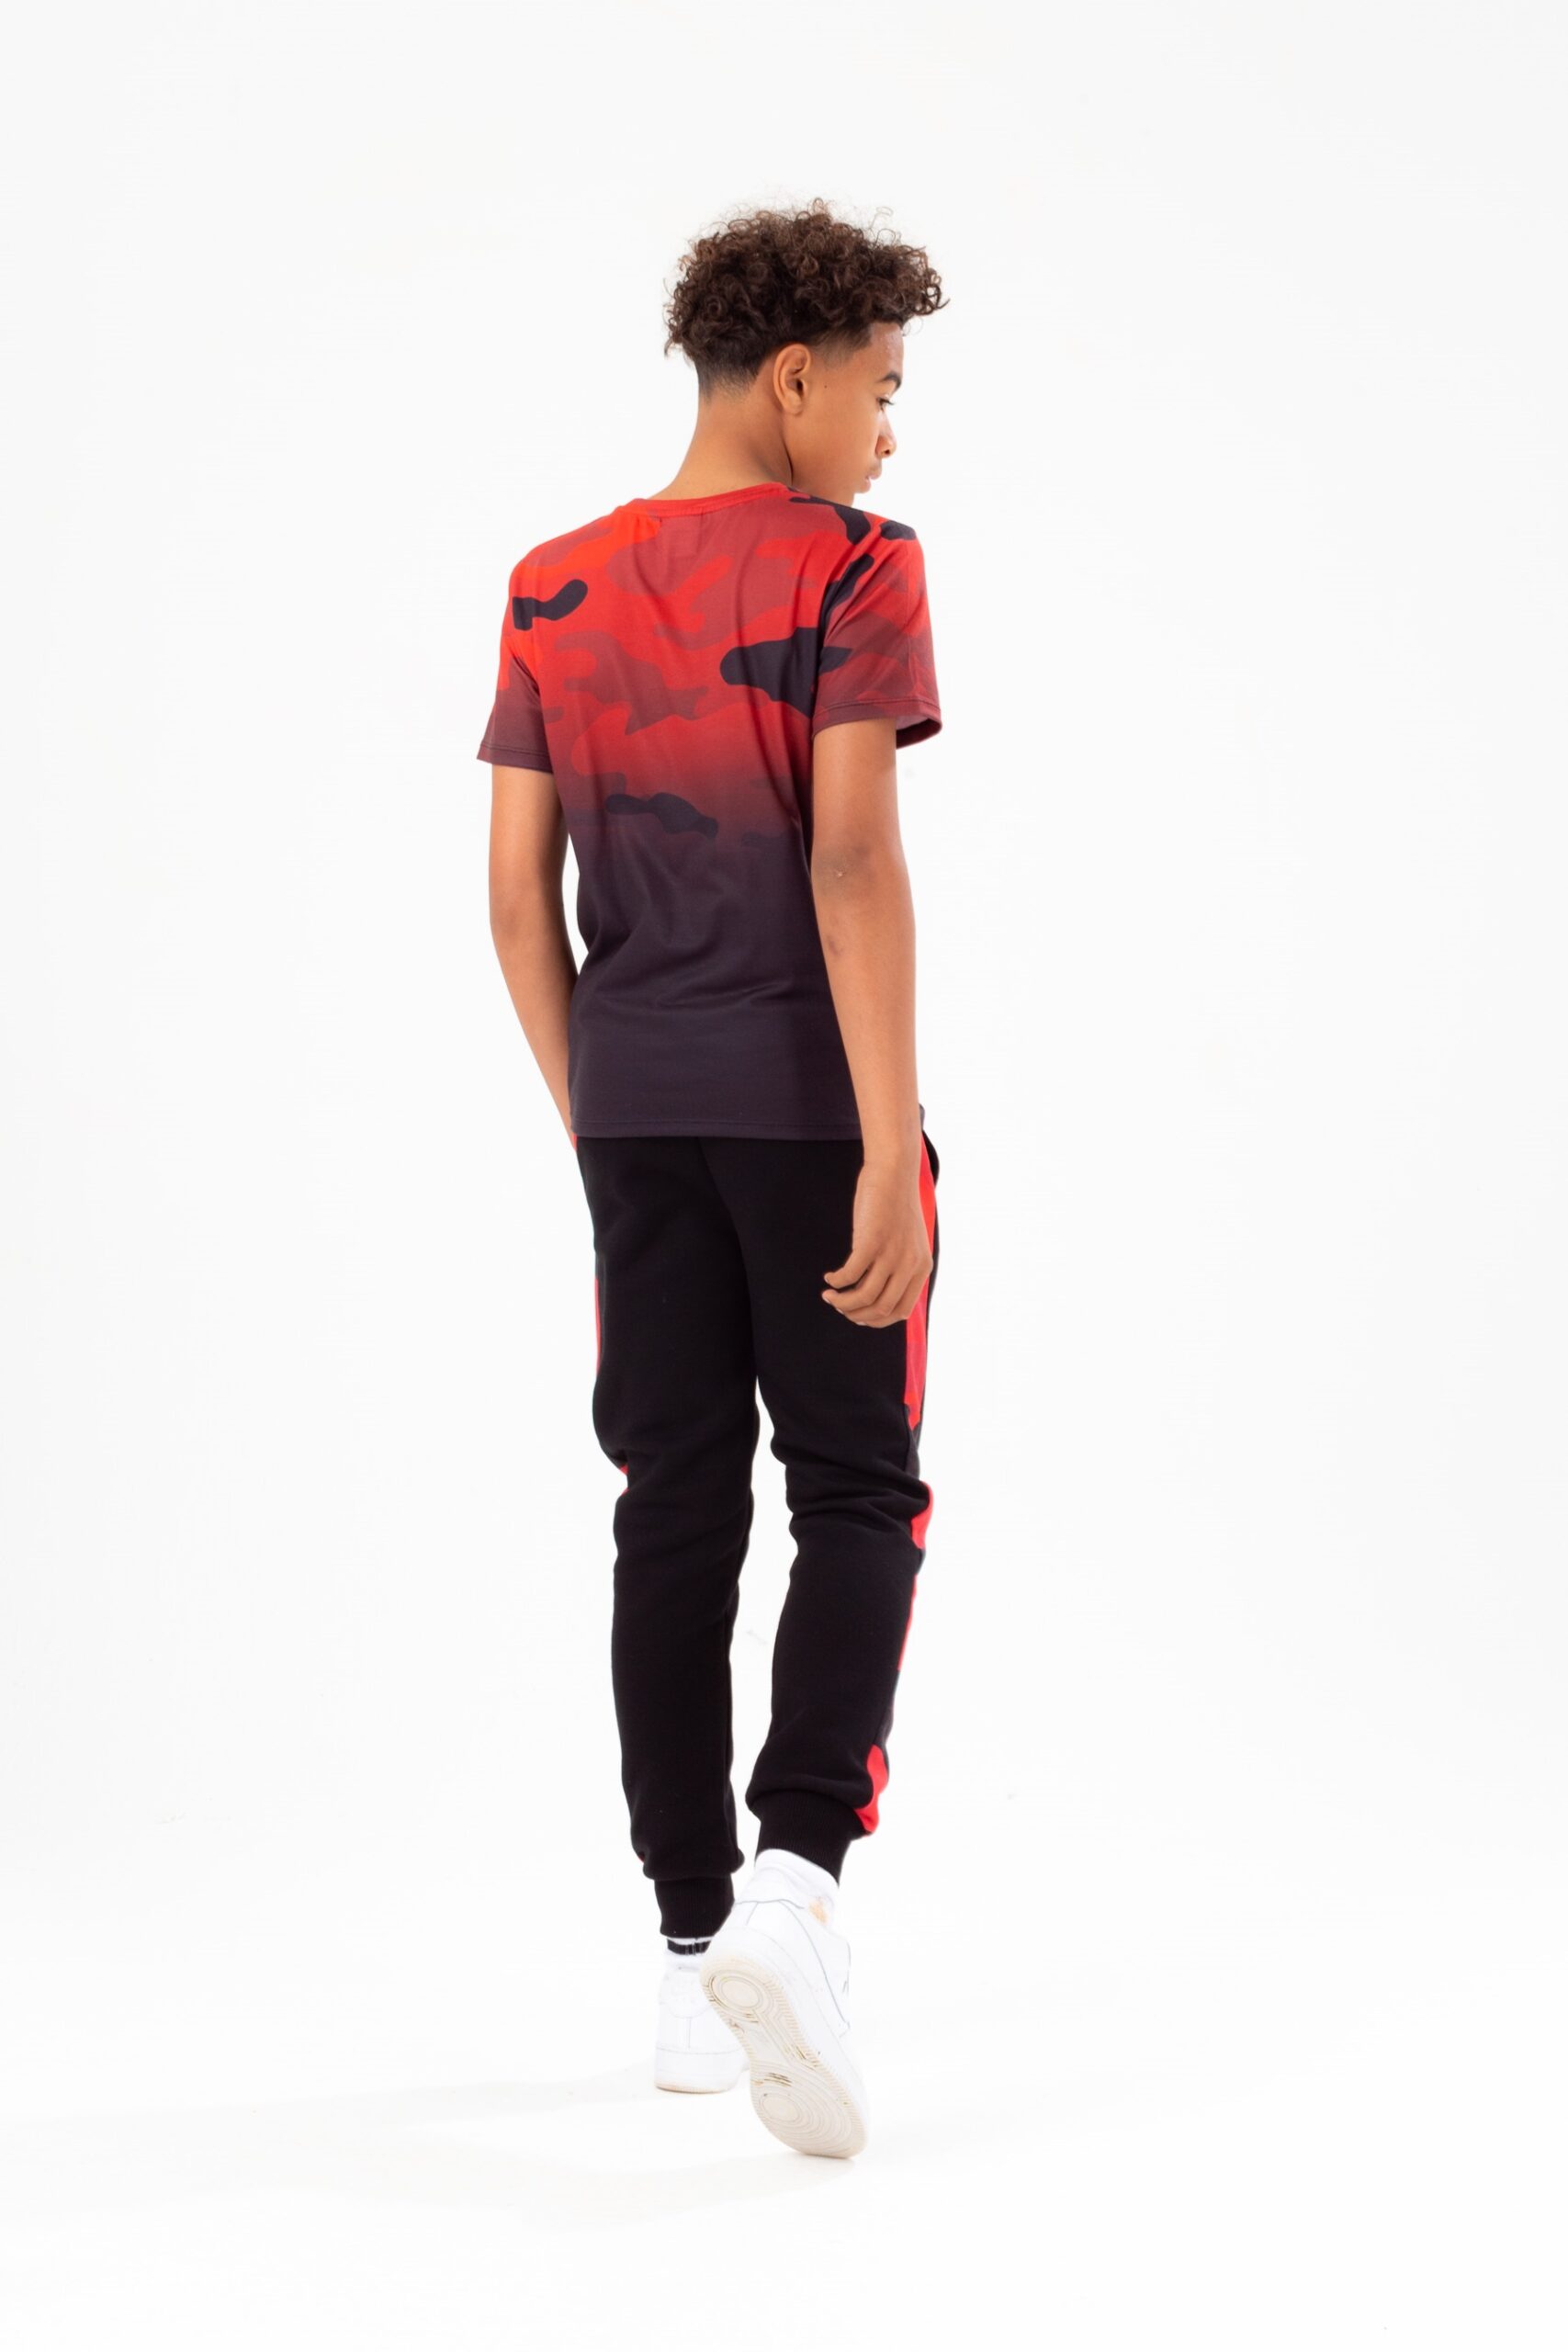 hype boys red camo tshirt on model back view